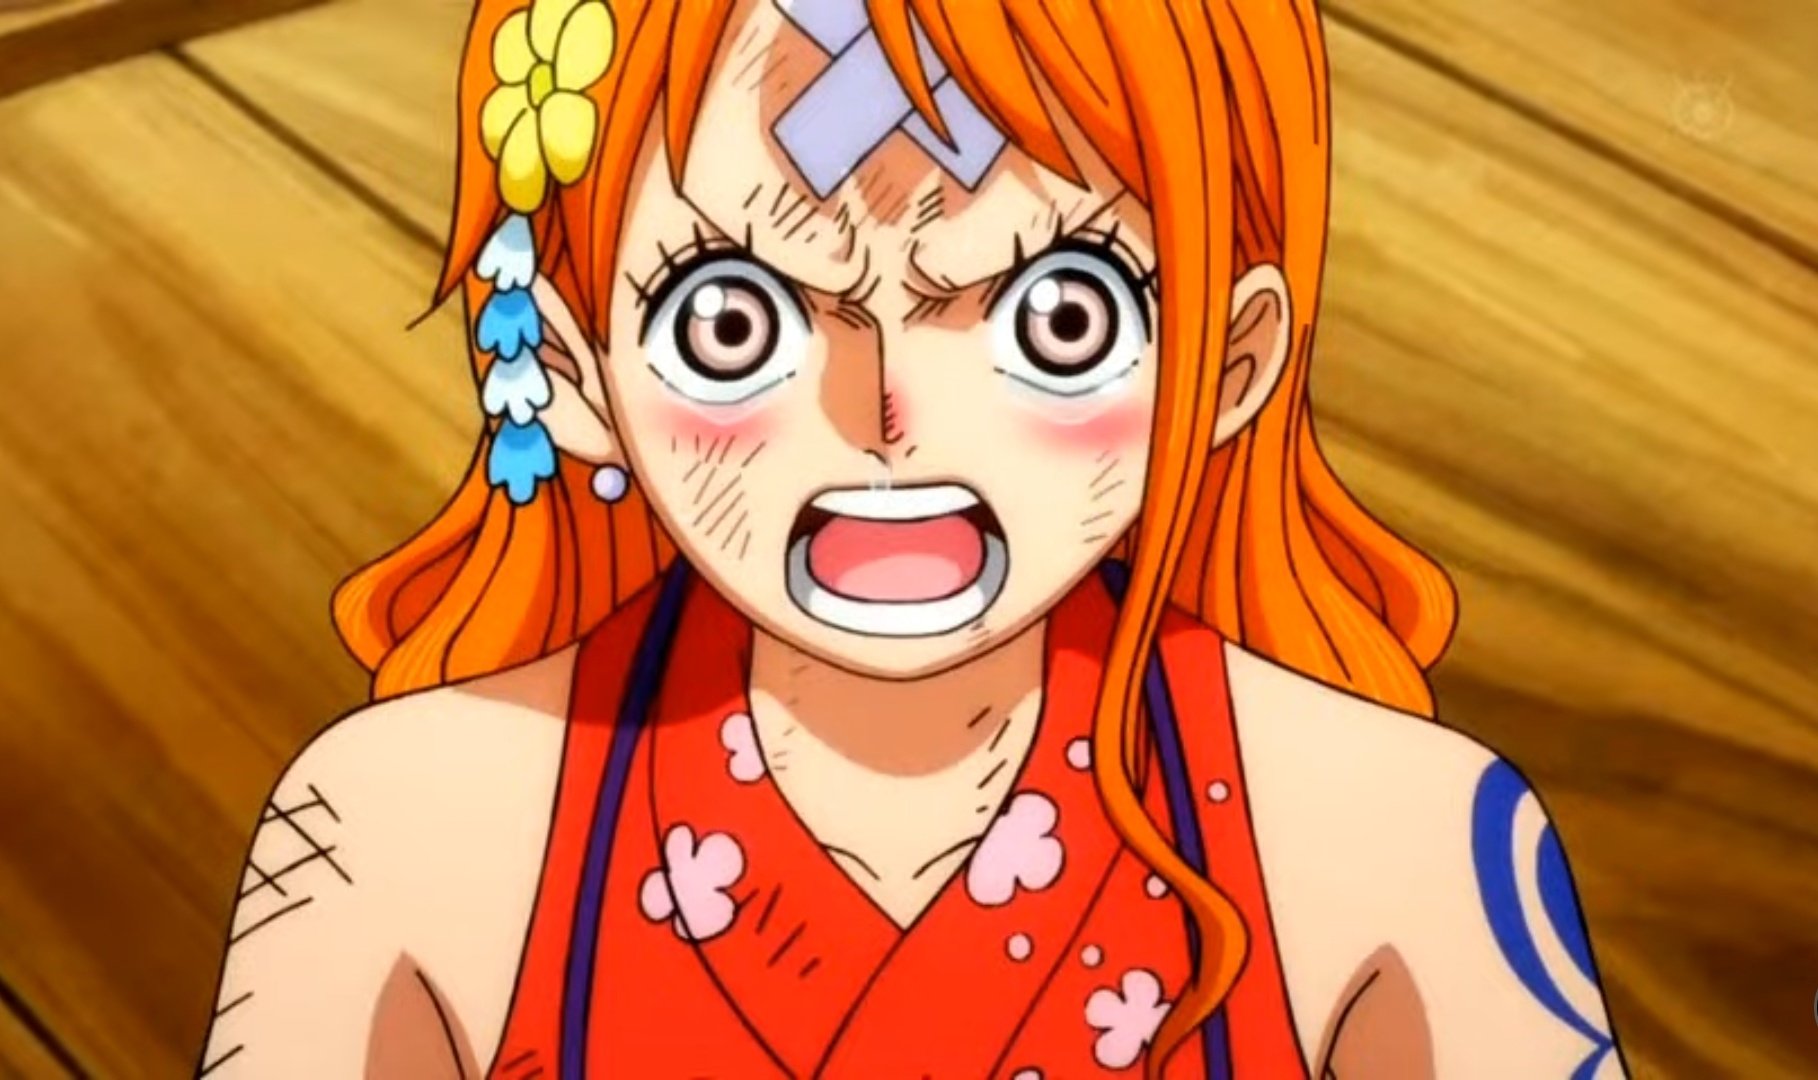 Nami crying after Luffy put his hat on her